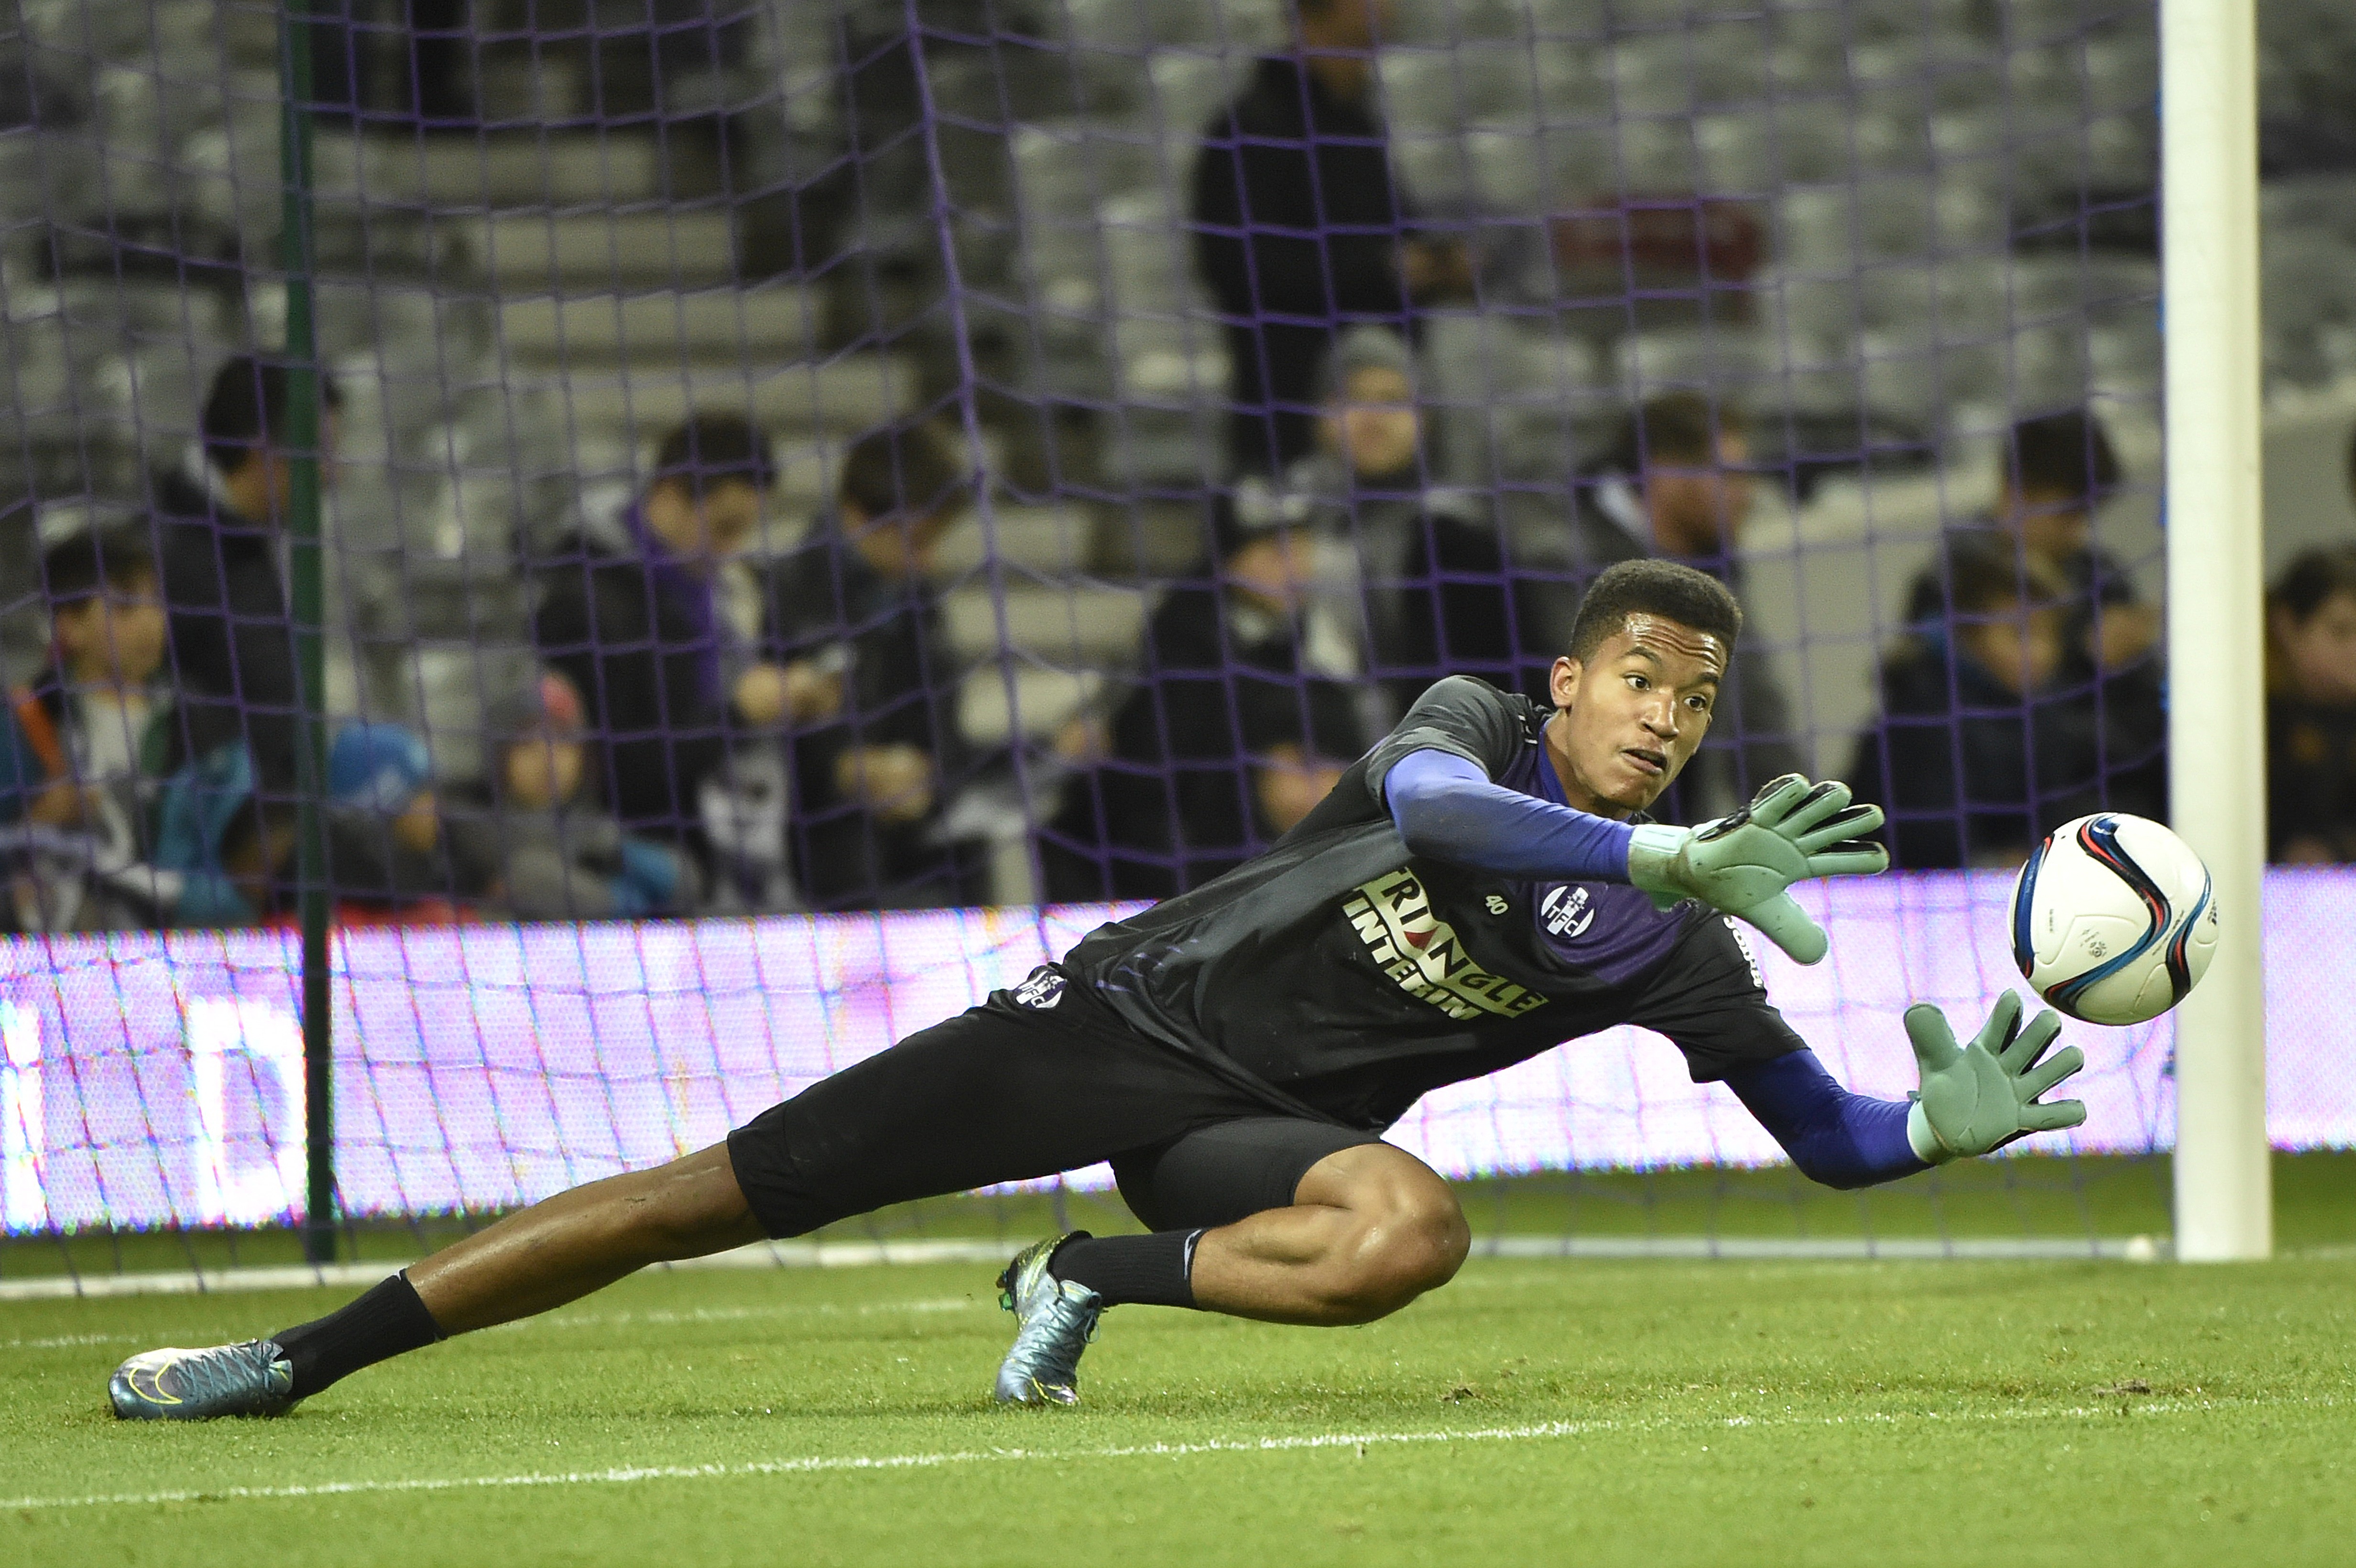 Toulouse's French goalkeeper Alban Lafont warms up before the French L1 football match Toulouse against Lorient on Ddecember 5, 2015 at the Municipal Stadium in Toulouse.  AFP PHOTO /  PASCAL PAVANI / AFP / PASCAL PAVANI        (Photo credit should read PASCAL PAVANI/AFP/Getty Images)